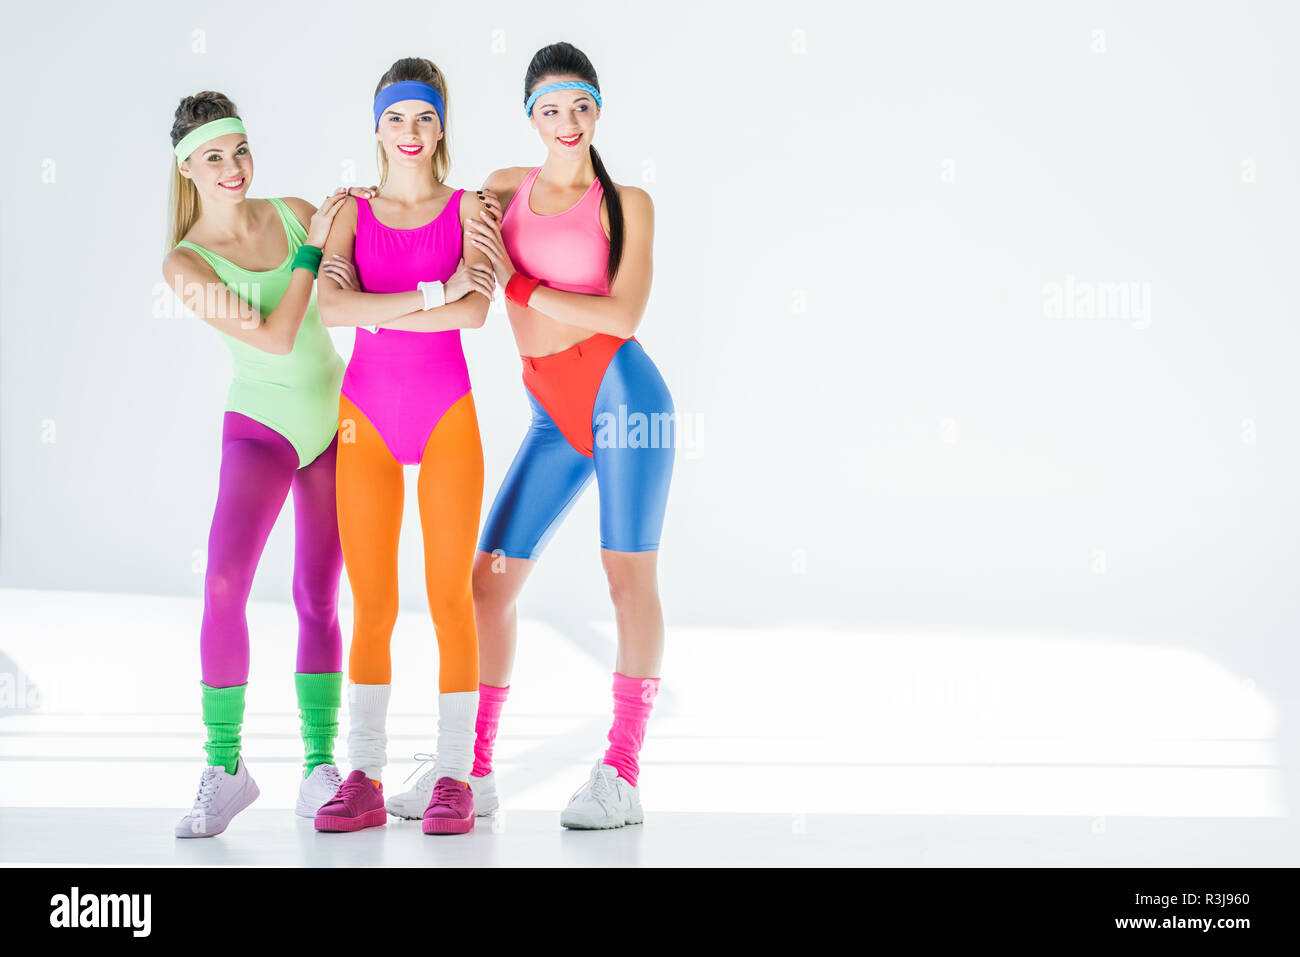 beautiful sporty young women in 80s style sportswear smiling at